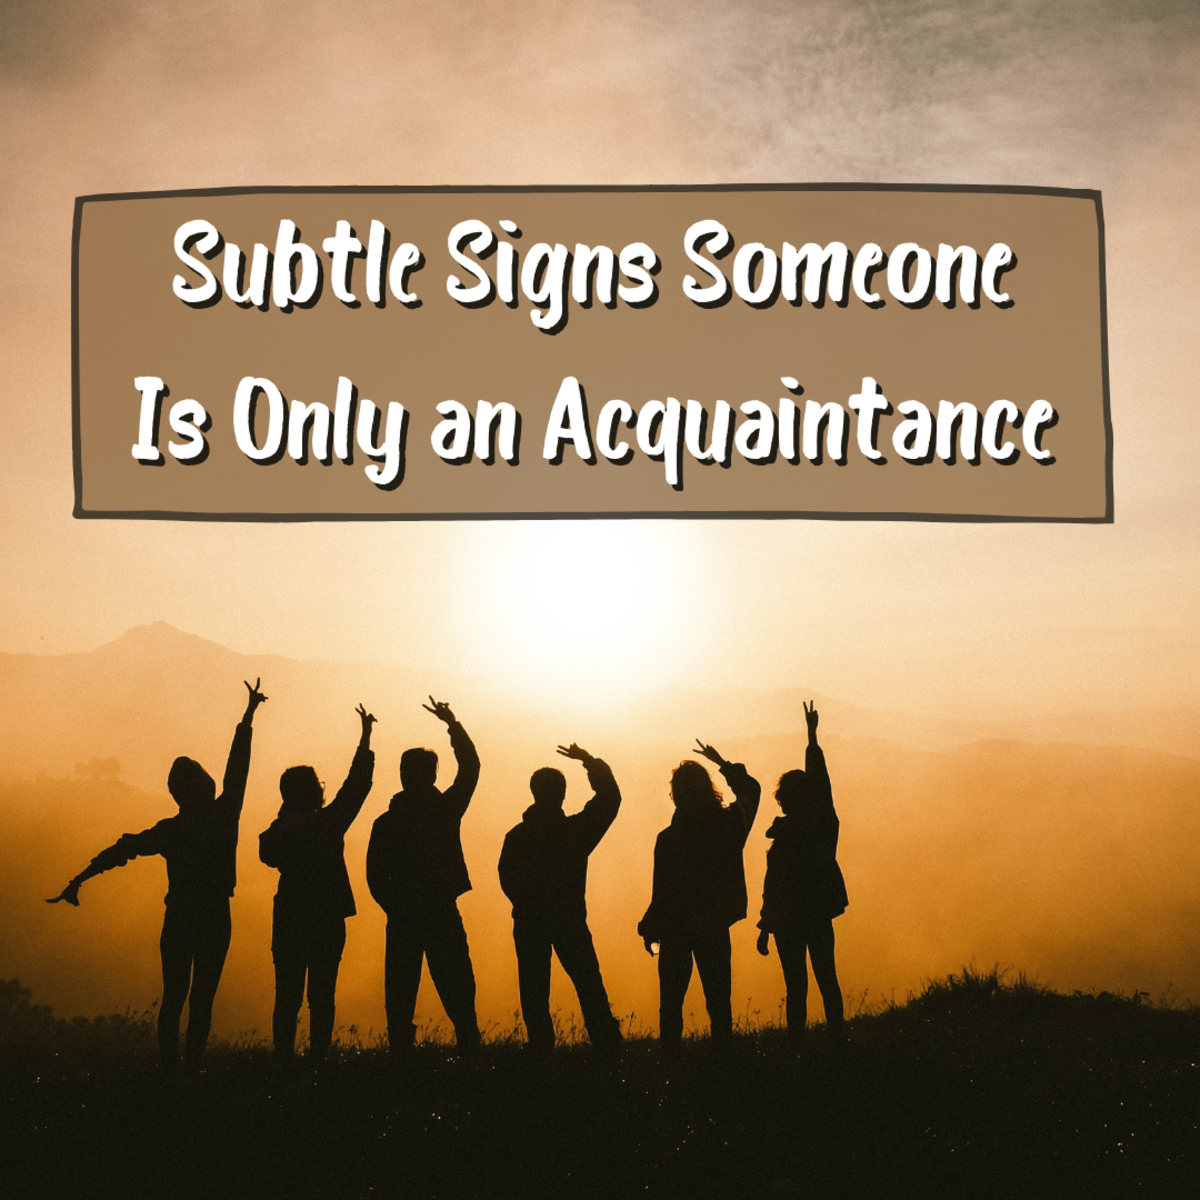 Having trouble figuring out if someone wants to be your friend or remain an acquaintance? Read on to learn 5 subtle signs that someone only wants to be your acquaintance.